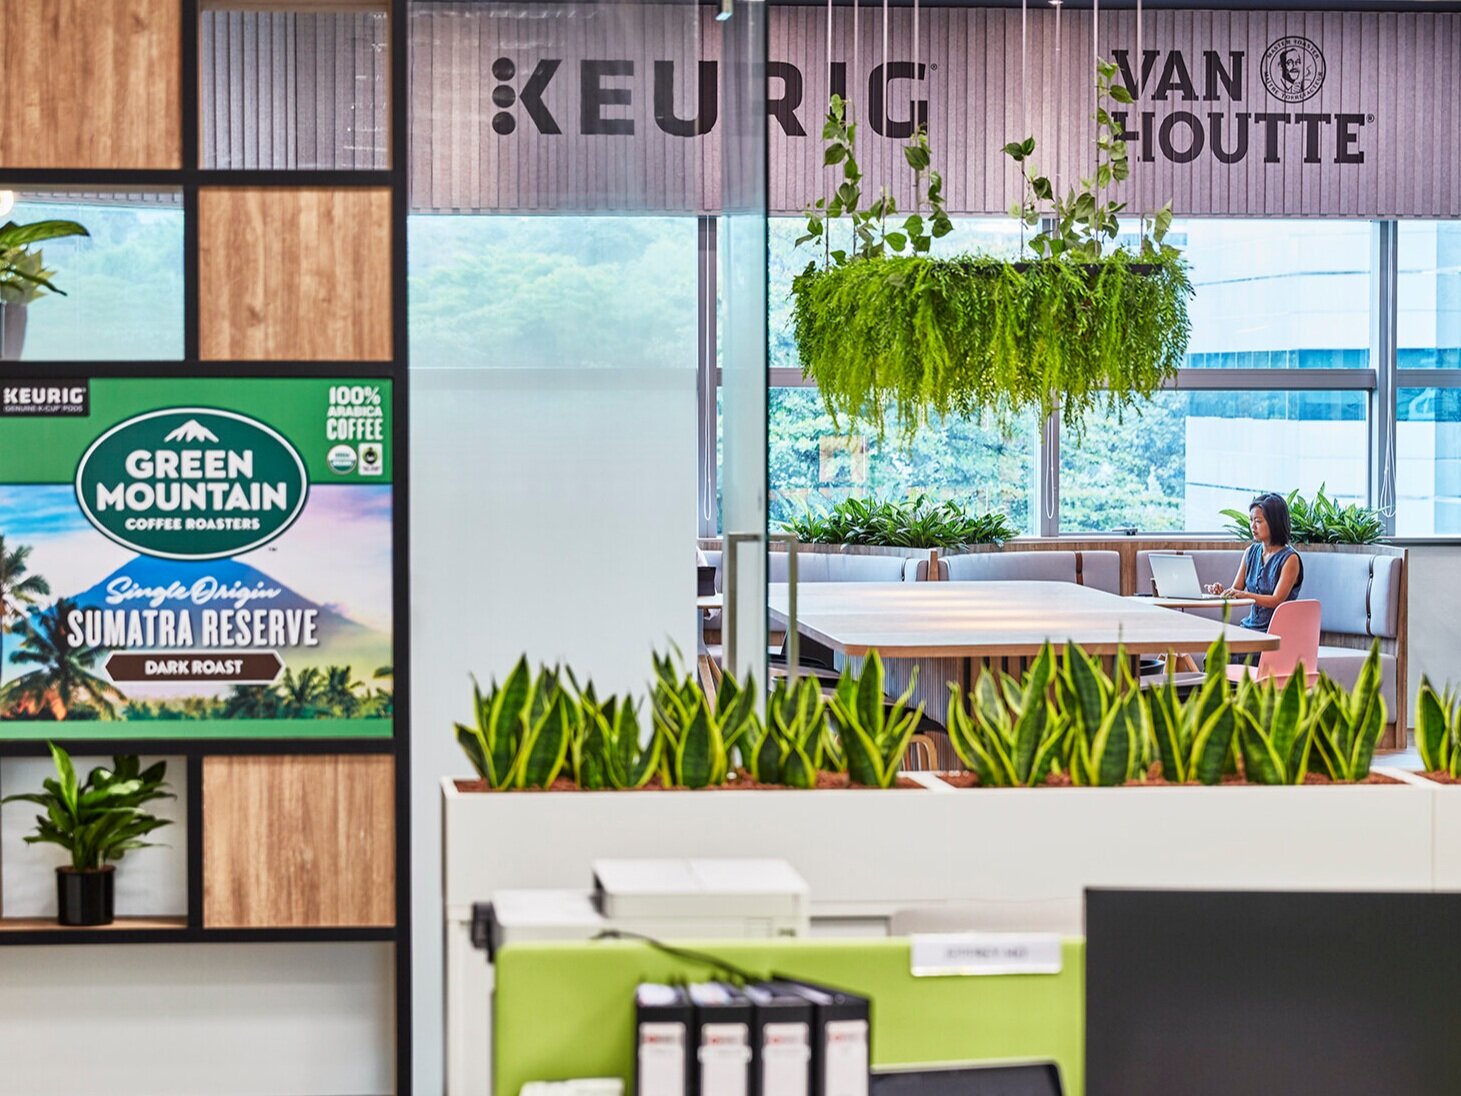  The Keurig Singapore office is designed to Biophilic principles, boosting staff well-being through a strong connection to nature  